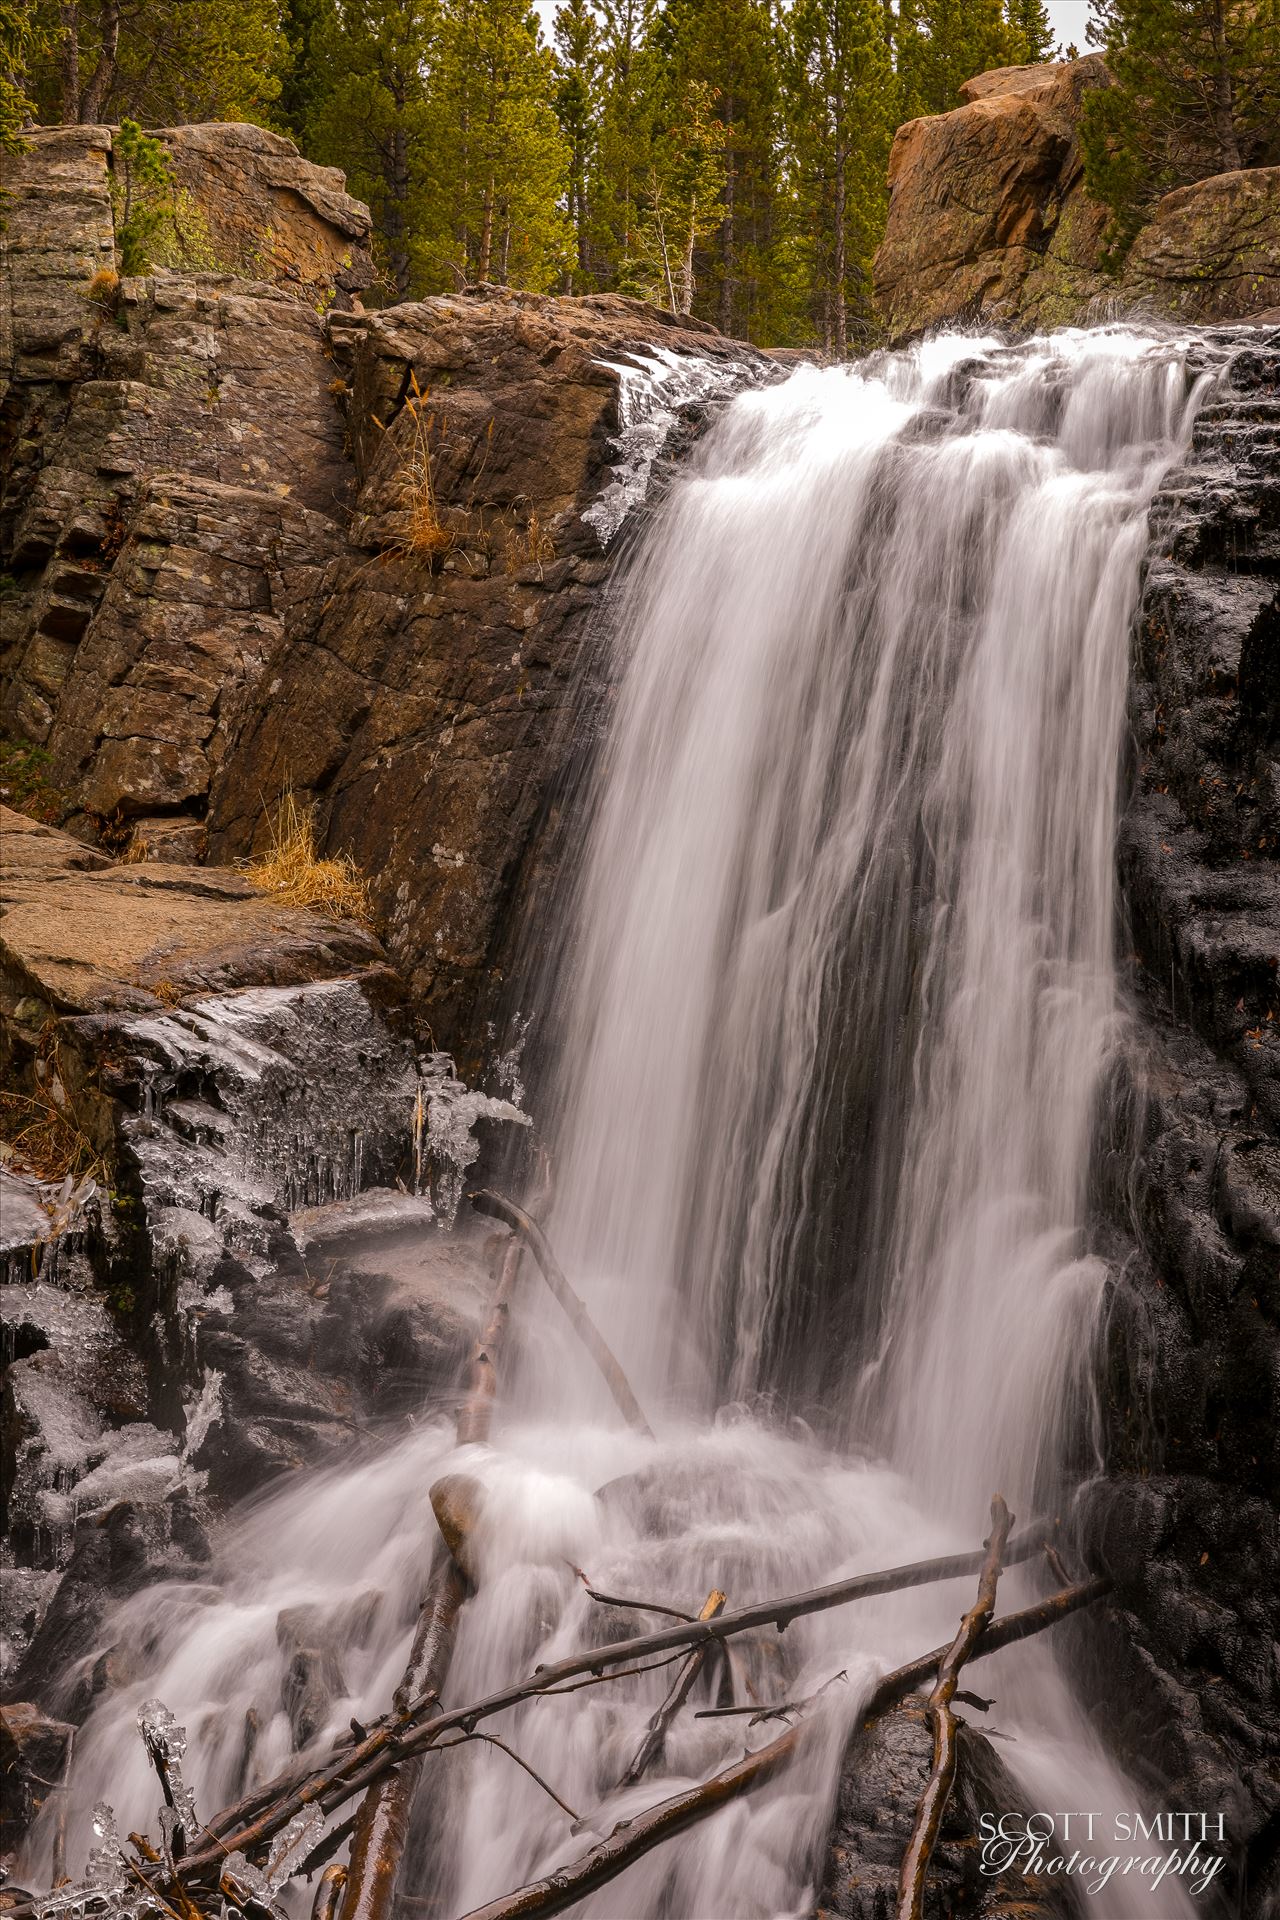 Alberta Falls, Rocky Mountain National Park No 3 - As winter approaches and the temperature starts to drop, ice formations start to appear around Alberta Falls. by Scott Smith Photos